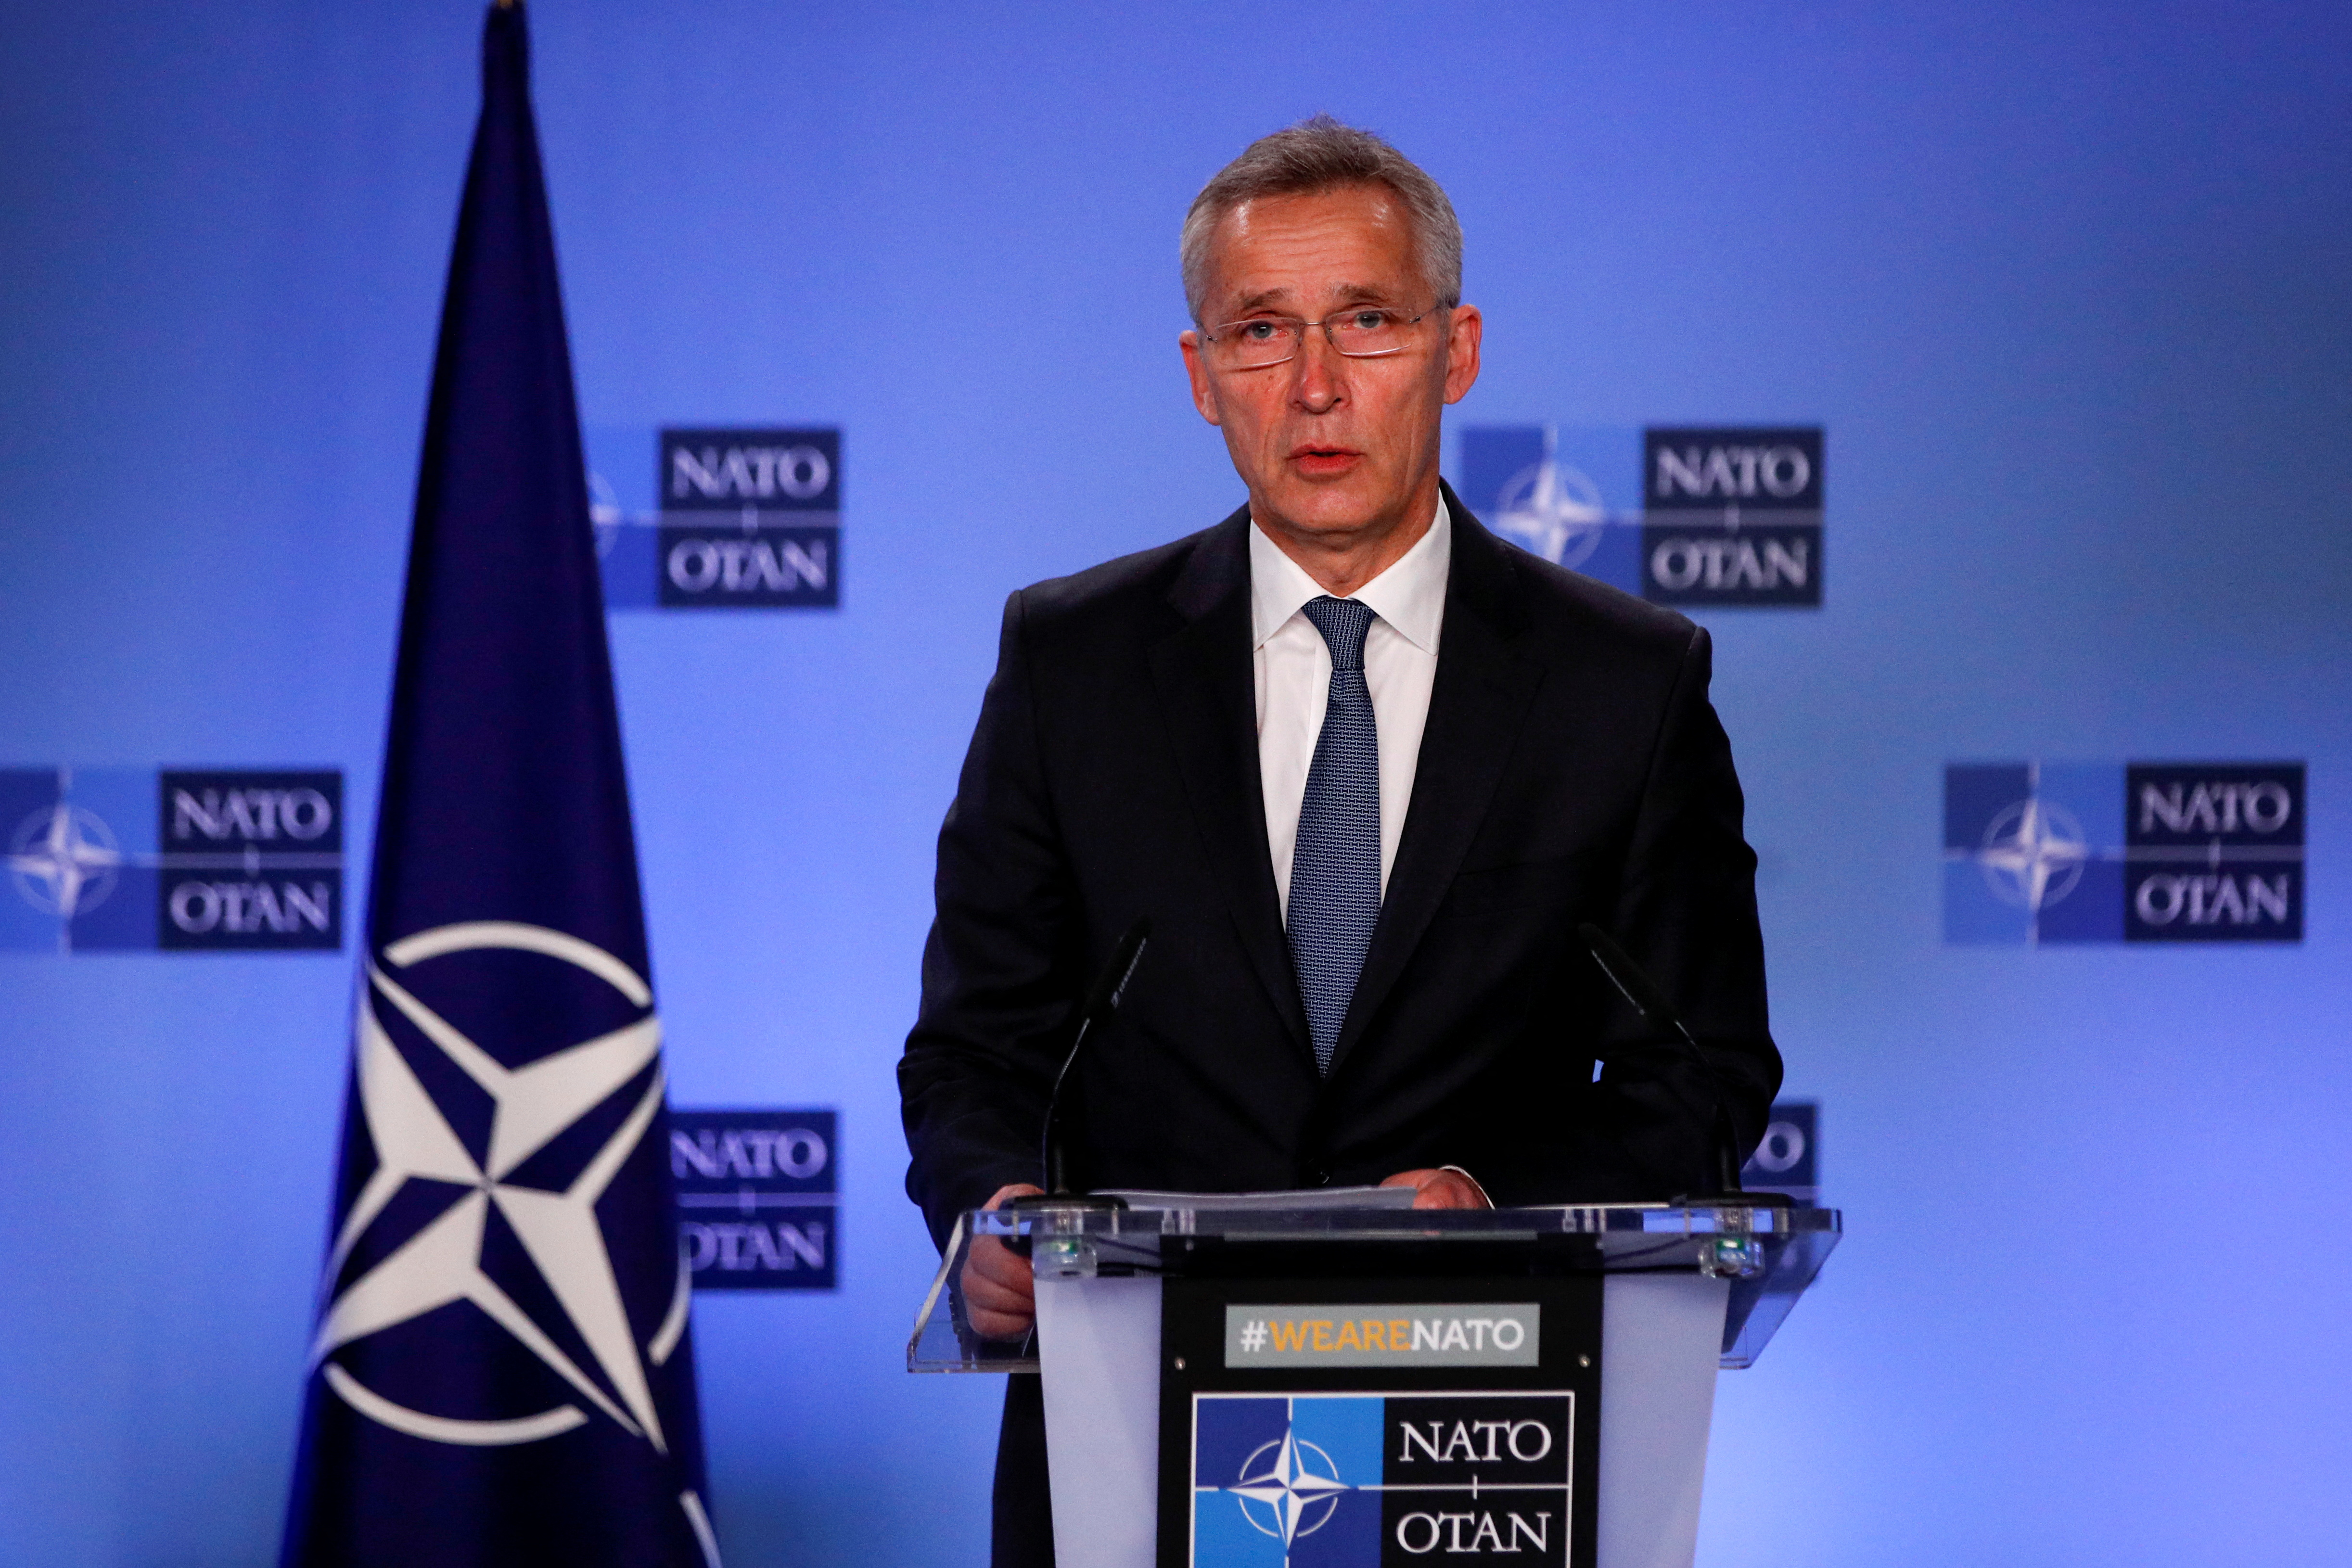 NATO Secretary General Stoltenberg and North Macedonian PM Kovacevski hold a joint news conference in Brussels